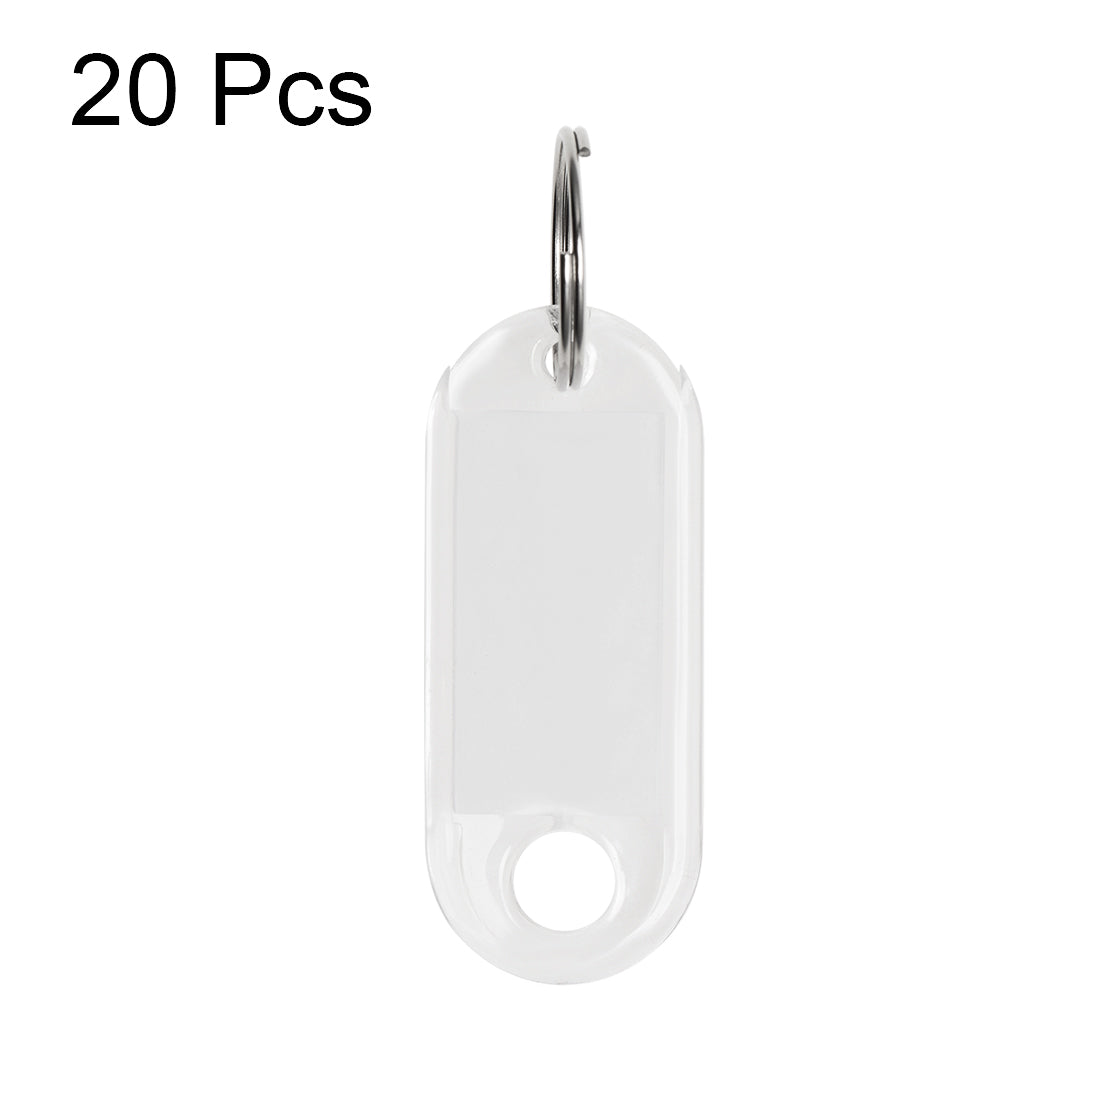 uxcell Uxcell 20pcs of Plastic Key Tags with Split Ring Keychain ID Luggage Label Window